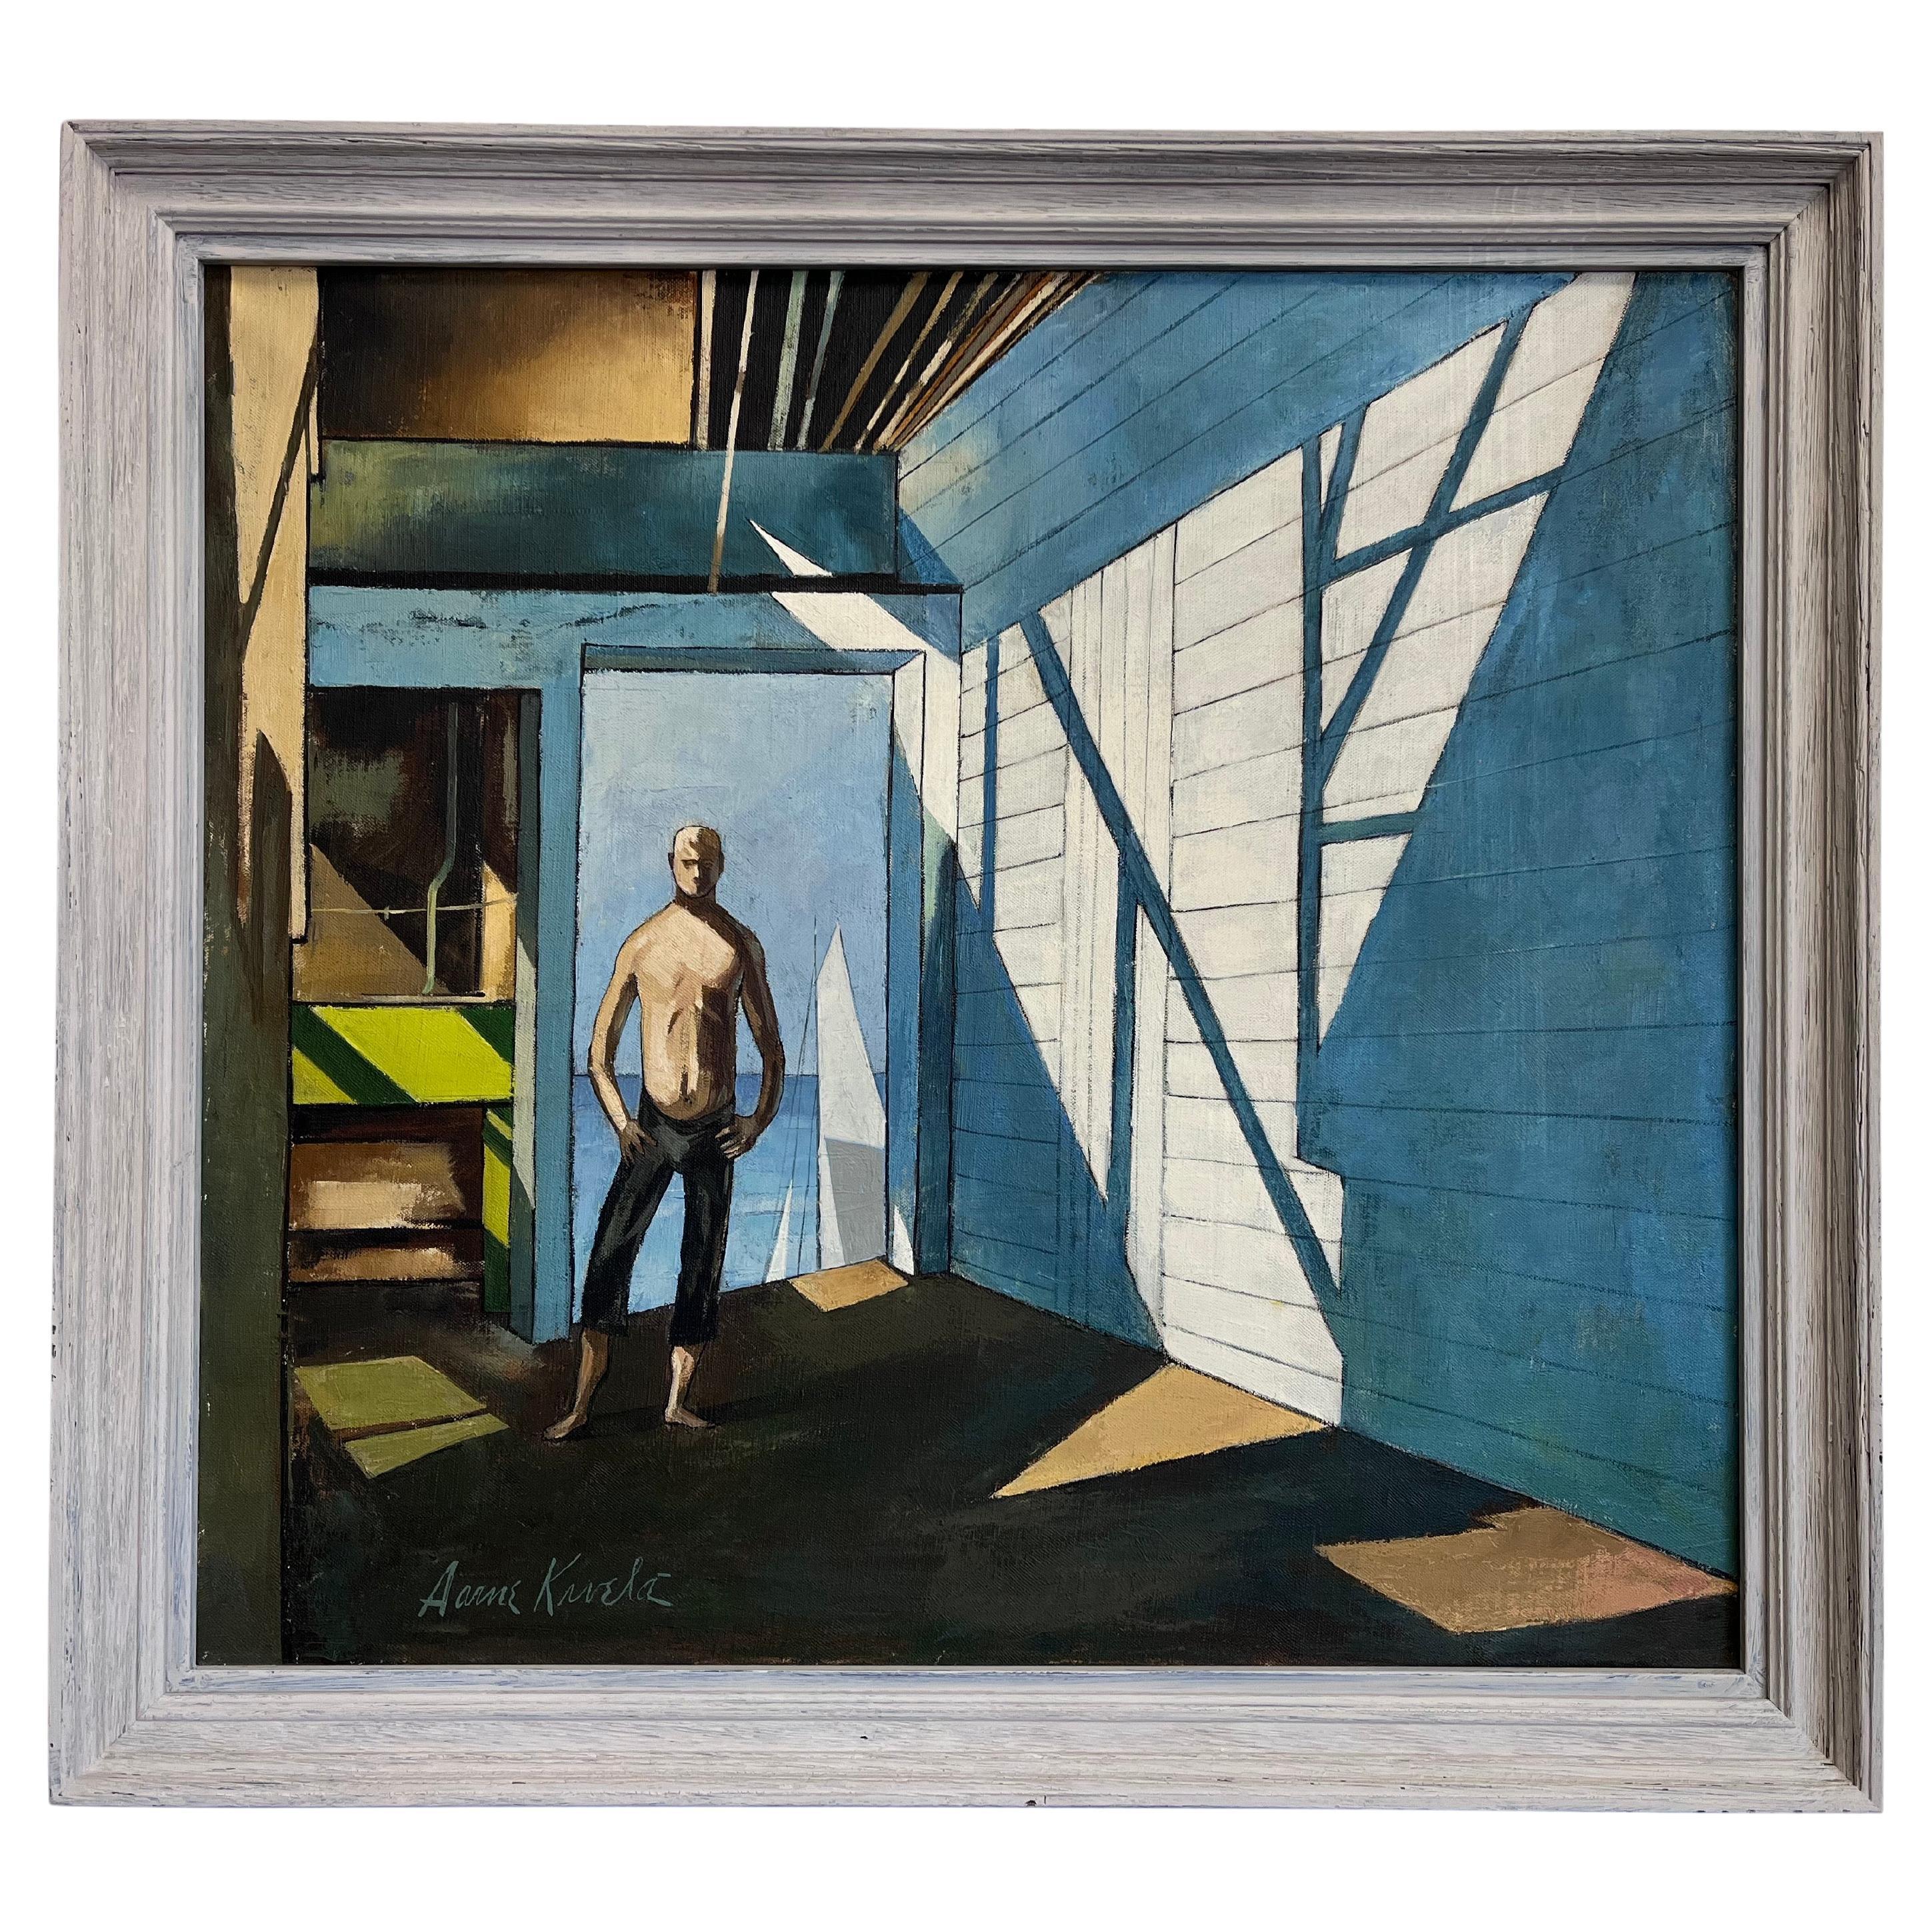 Mid Century Precisionist Style American Painting of a Male Figure in an Interior